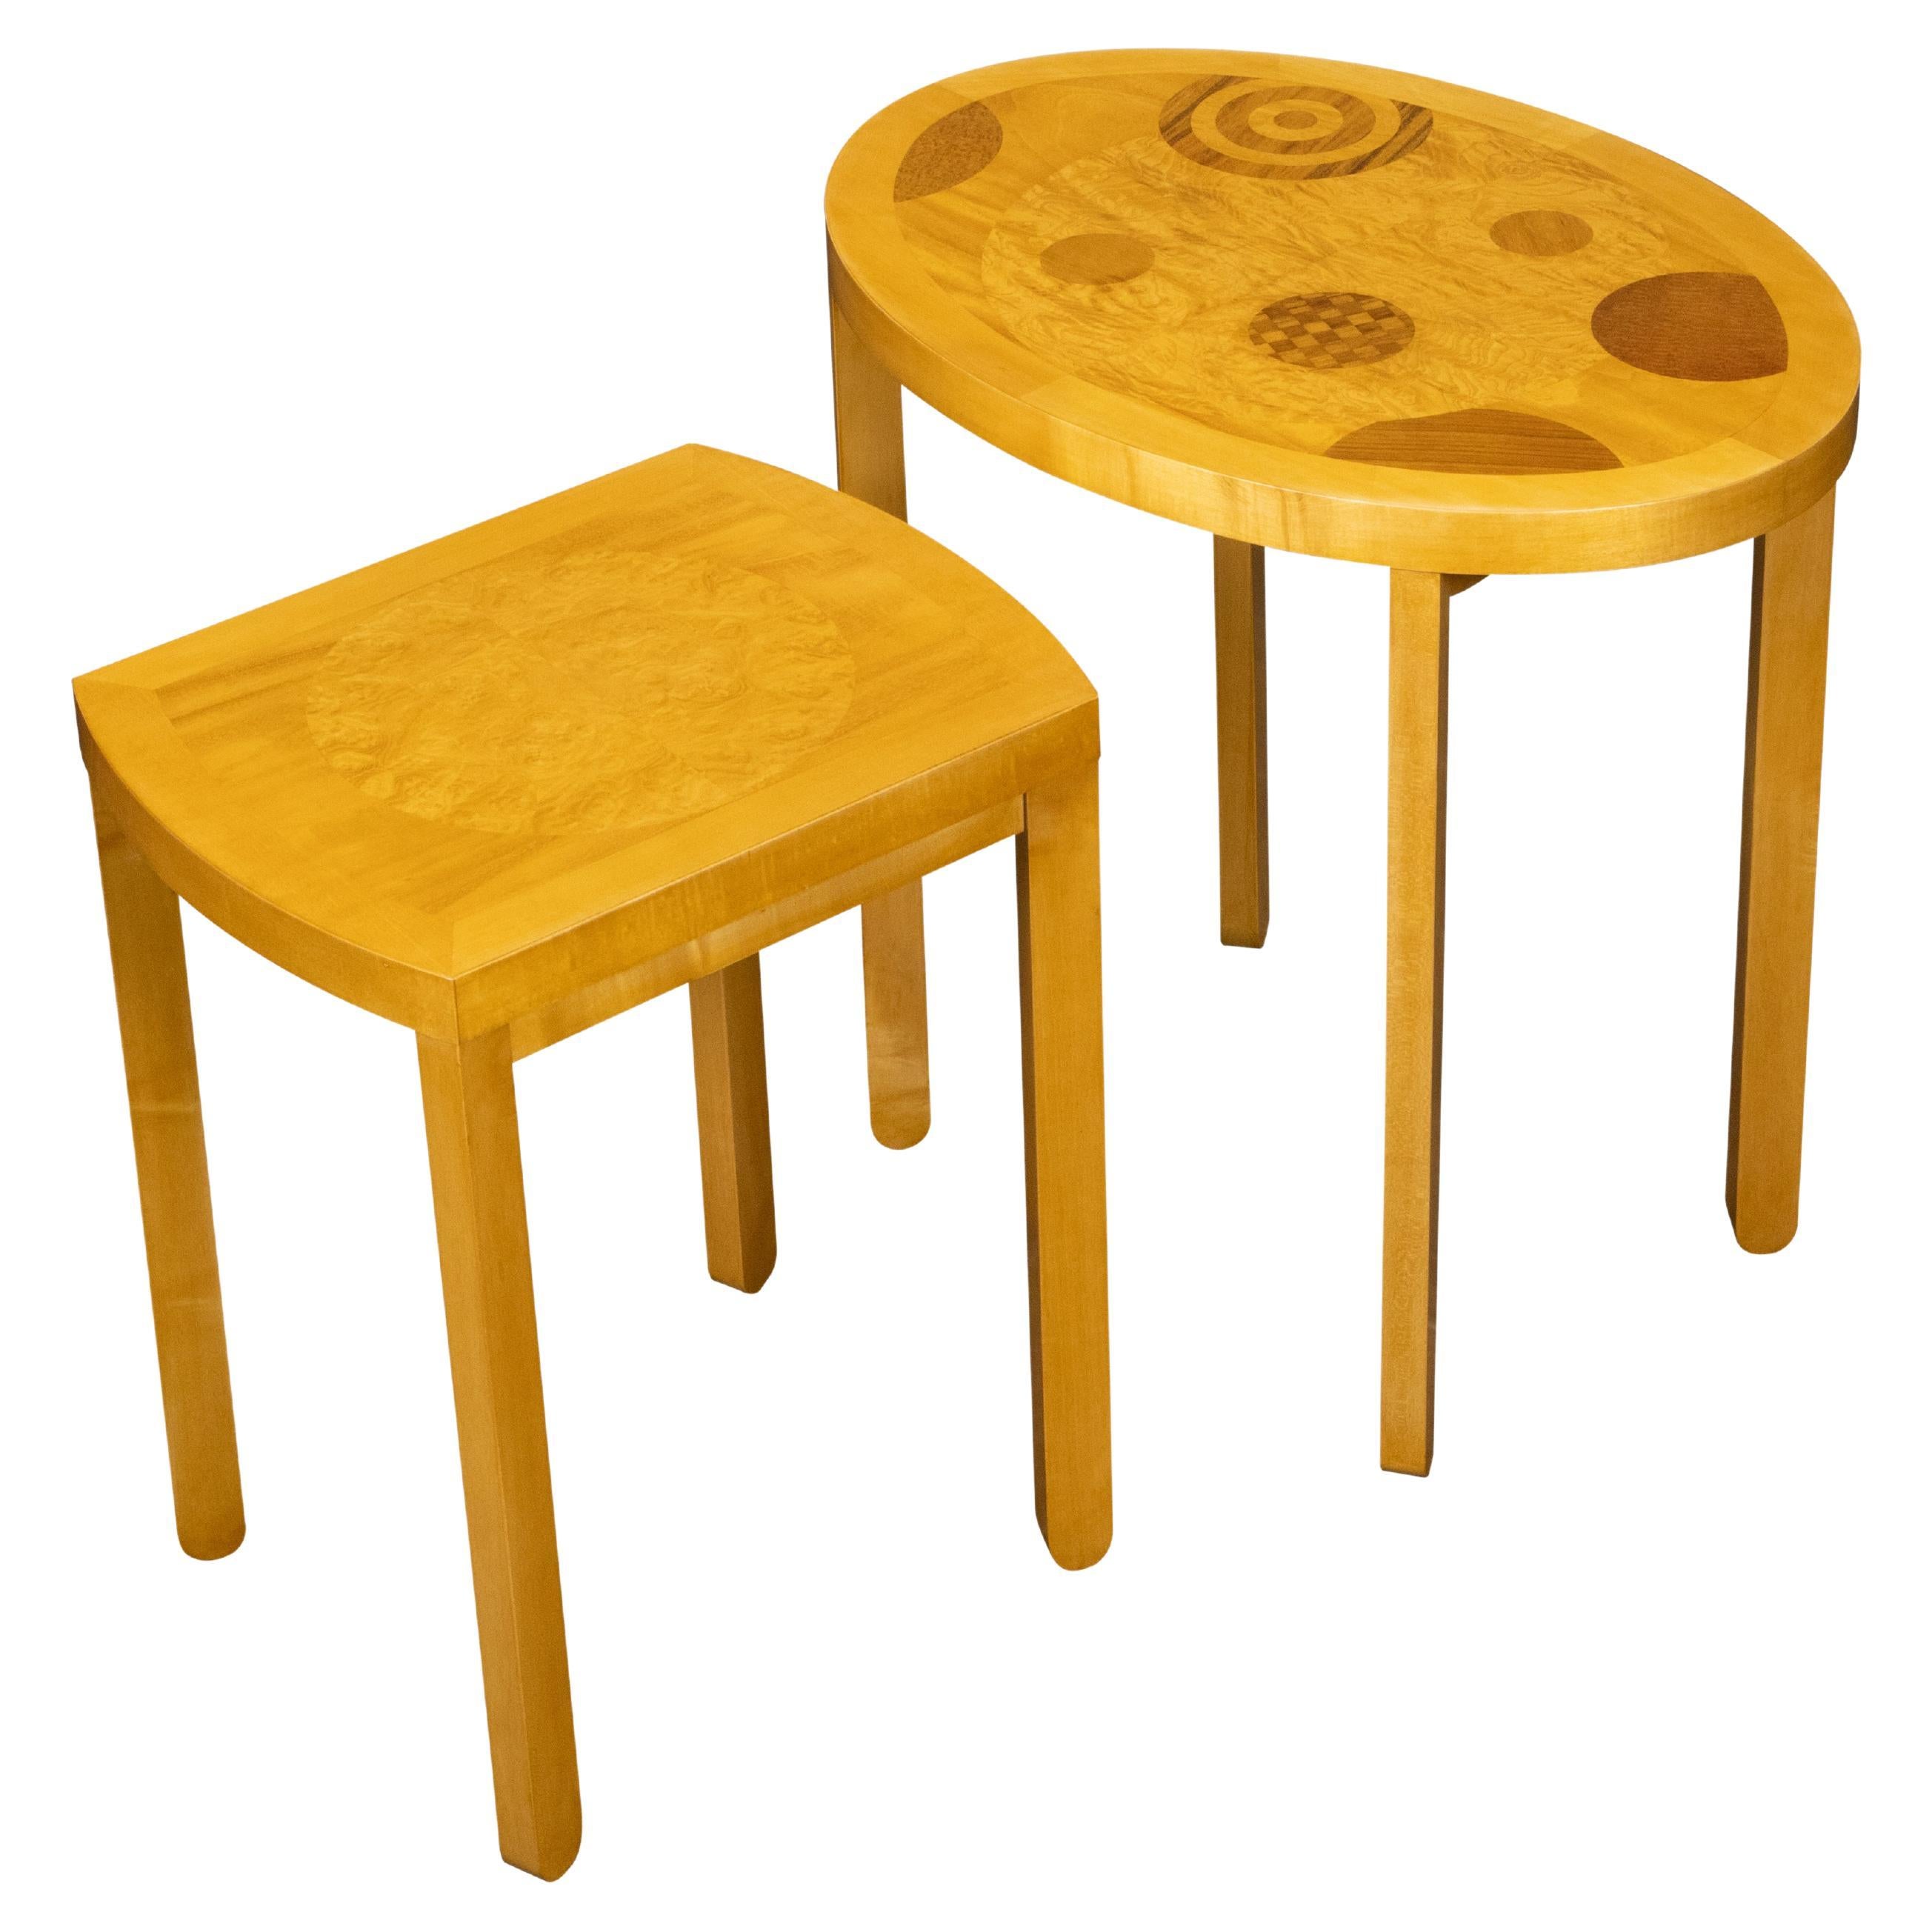 Baker Furniture Art Deco Style Nesting Tables with Whimsical Geometric Motifs